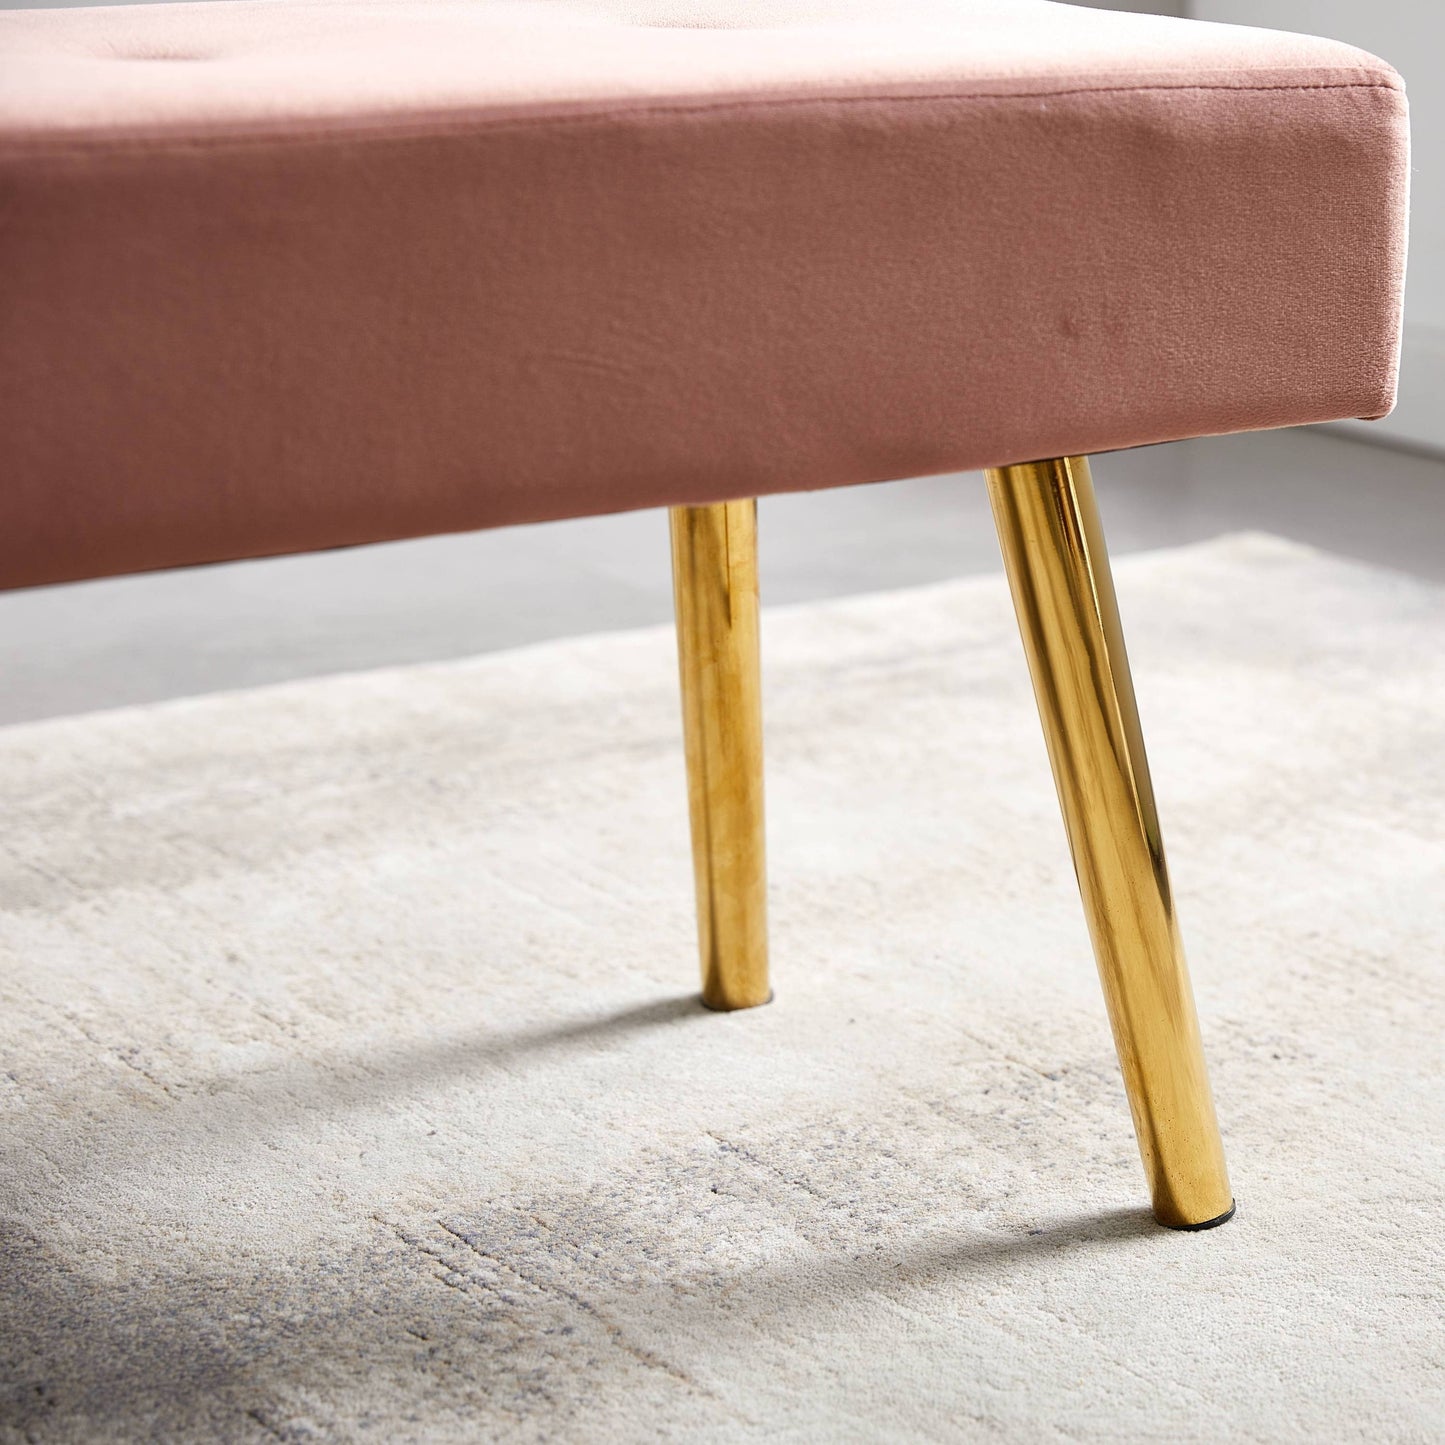 Tilley Long Bench -Pink Tufted Velvet With Gold Legs